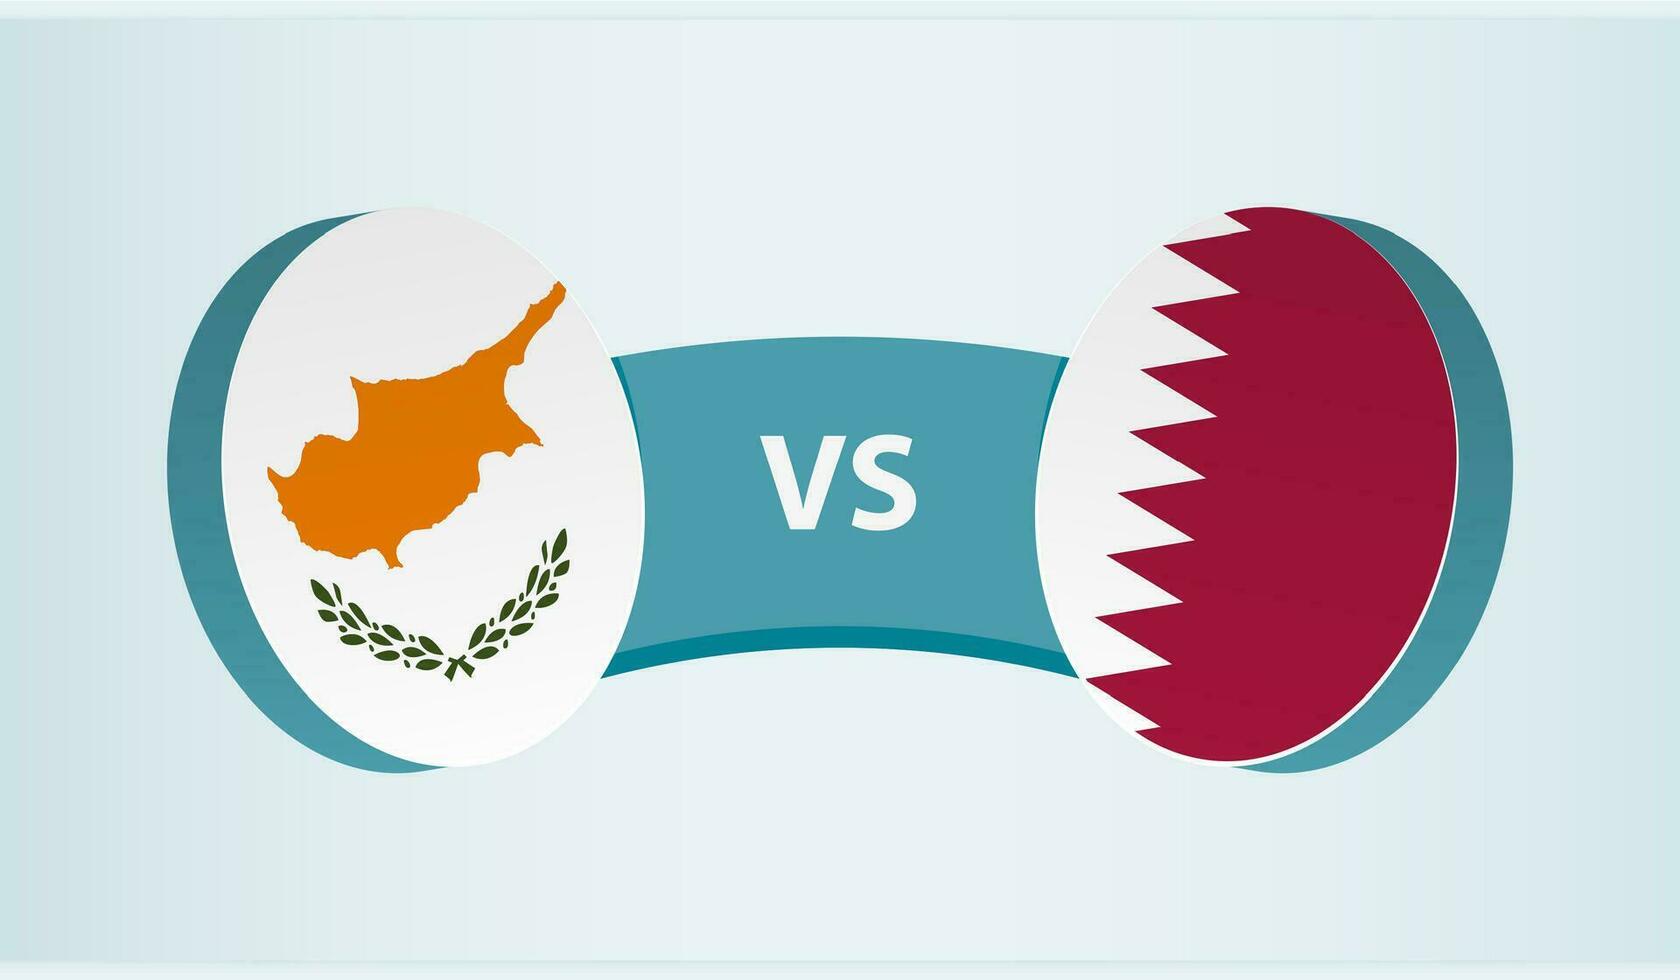 Cyprus versus Qatar, team sports competition concept. vector